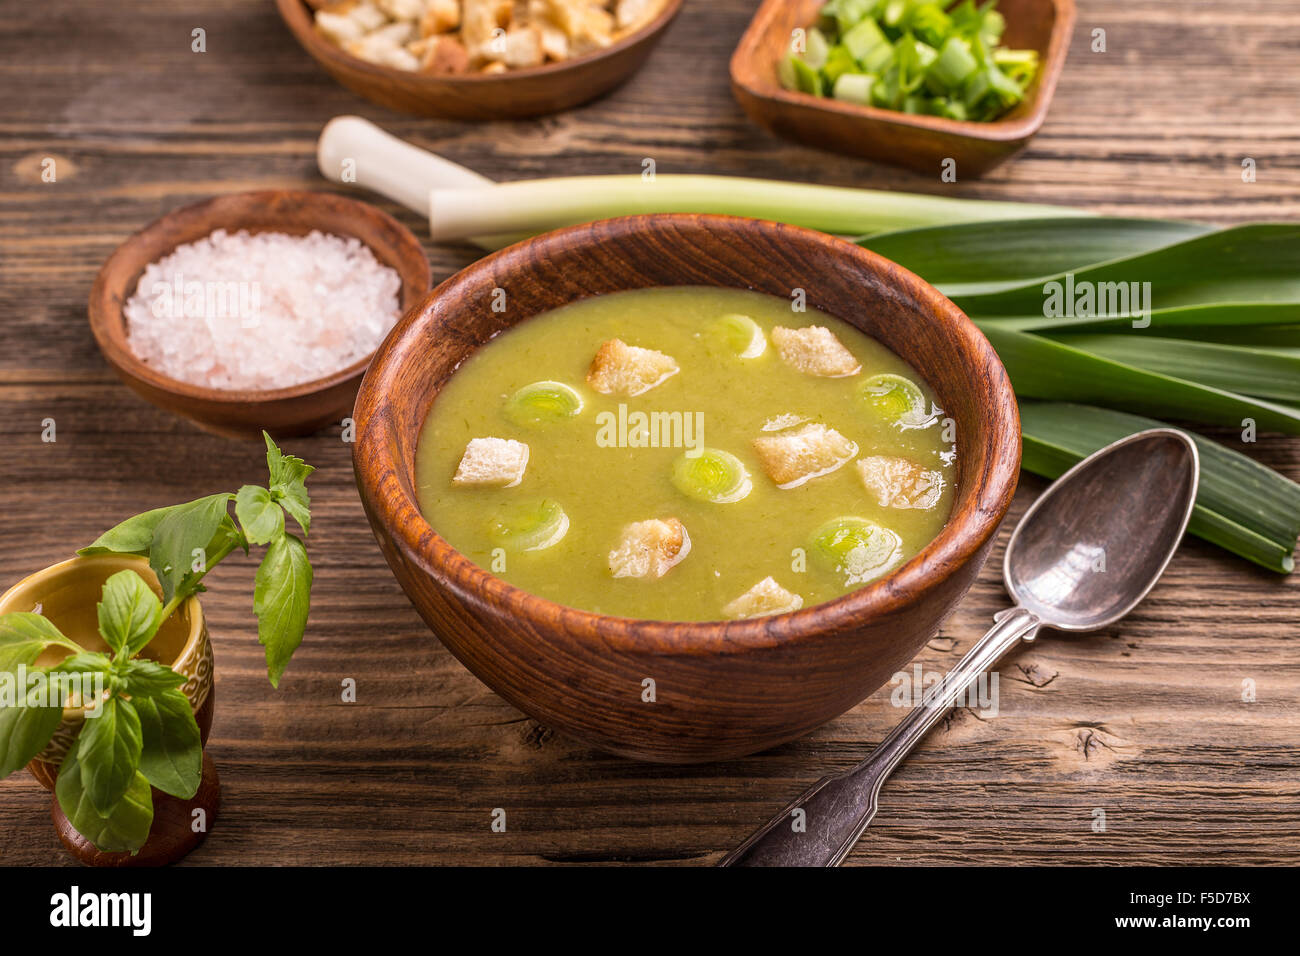 A bowl of leek and potato soup with bread croutons Stock Photo